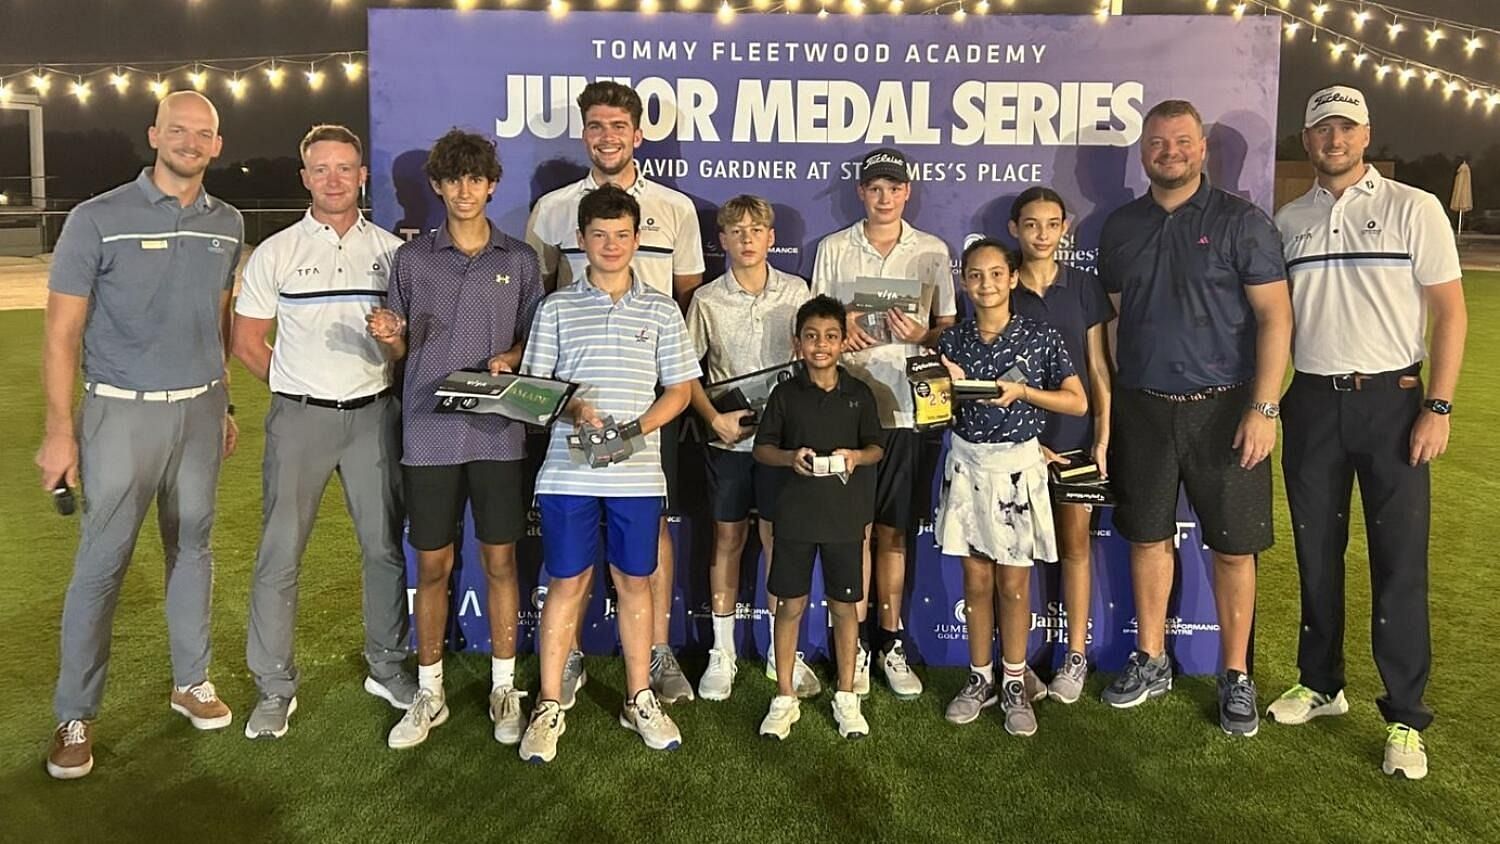 The winners of the different divisions at the Tommy Fleetwood Academy Junior Medal Series (Image via Jumeirah Golf Estates)